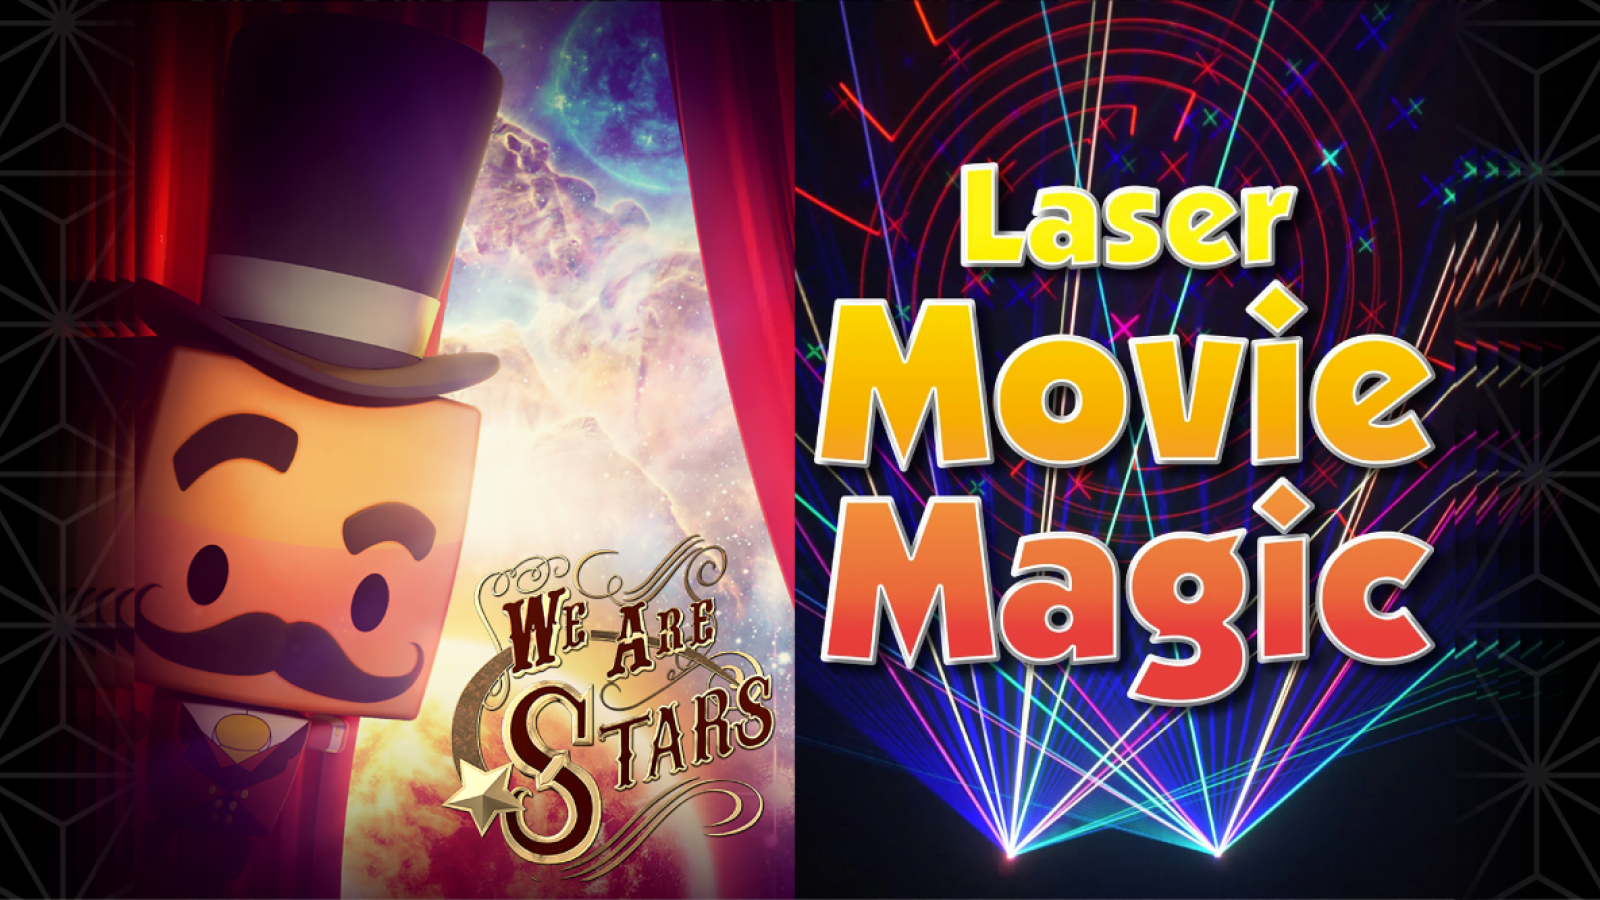 Still images of character from We Are Stars film and lasers on the right and text laser movie magic 